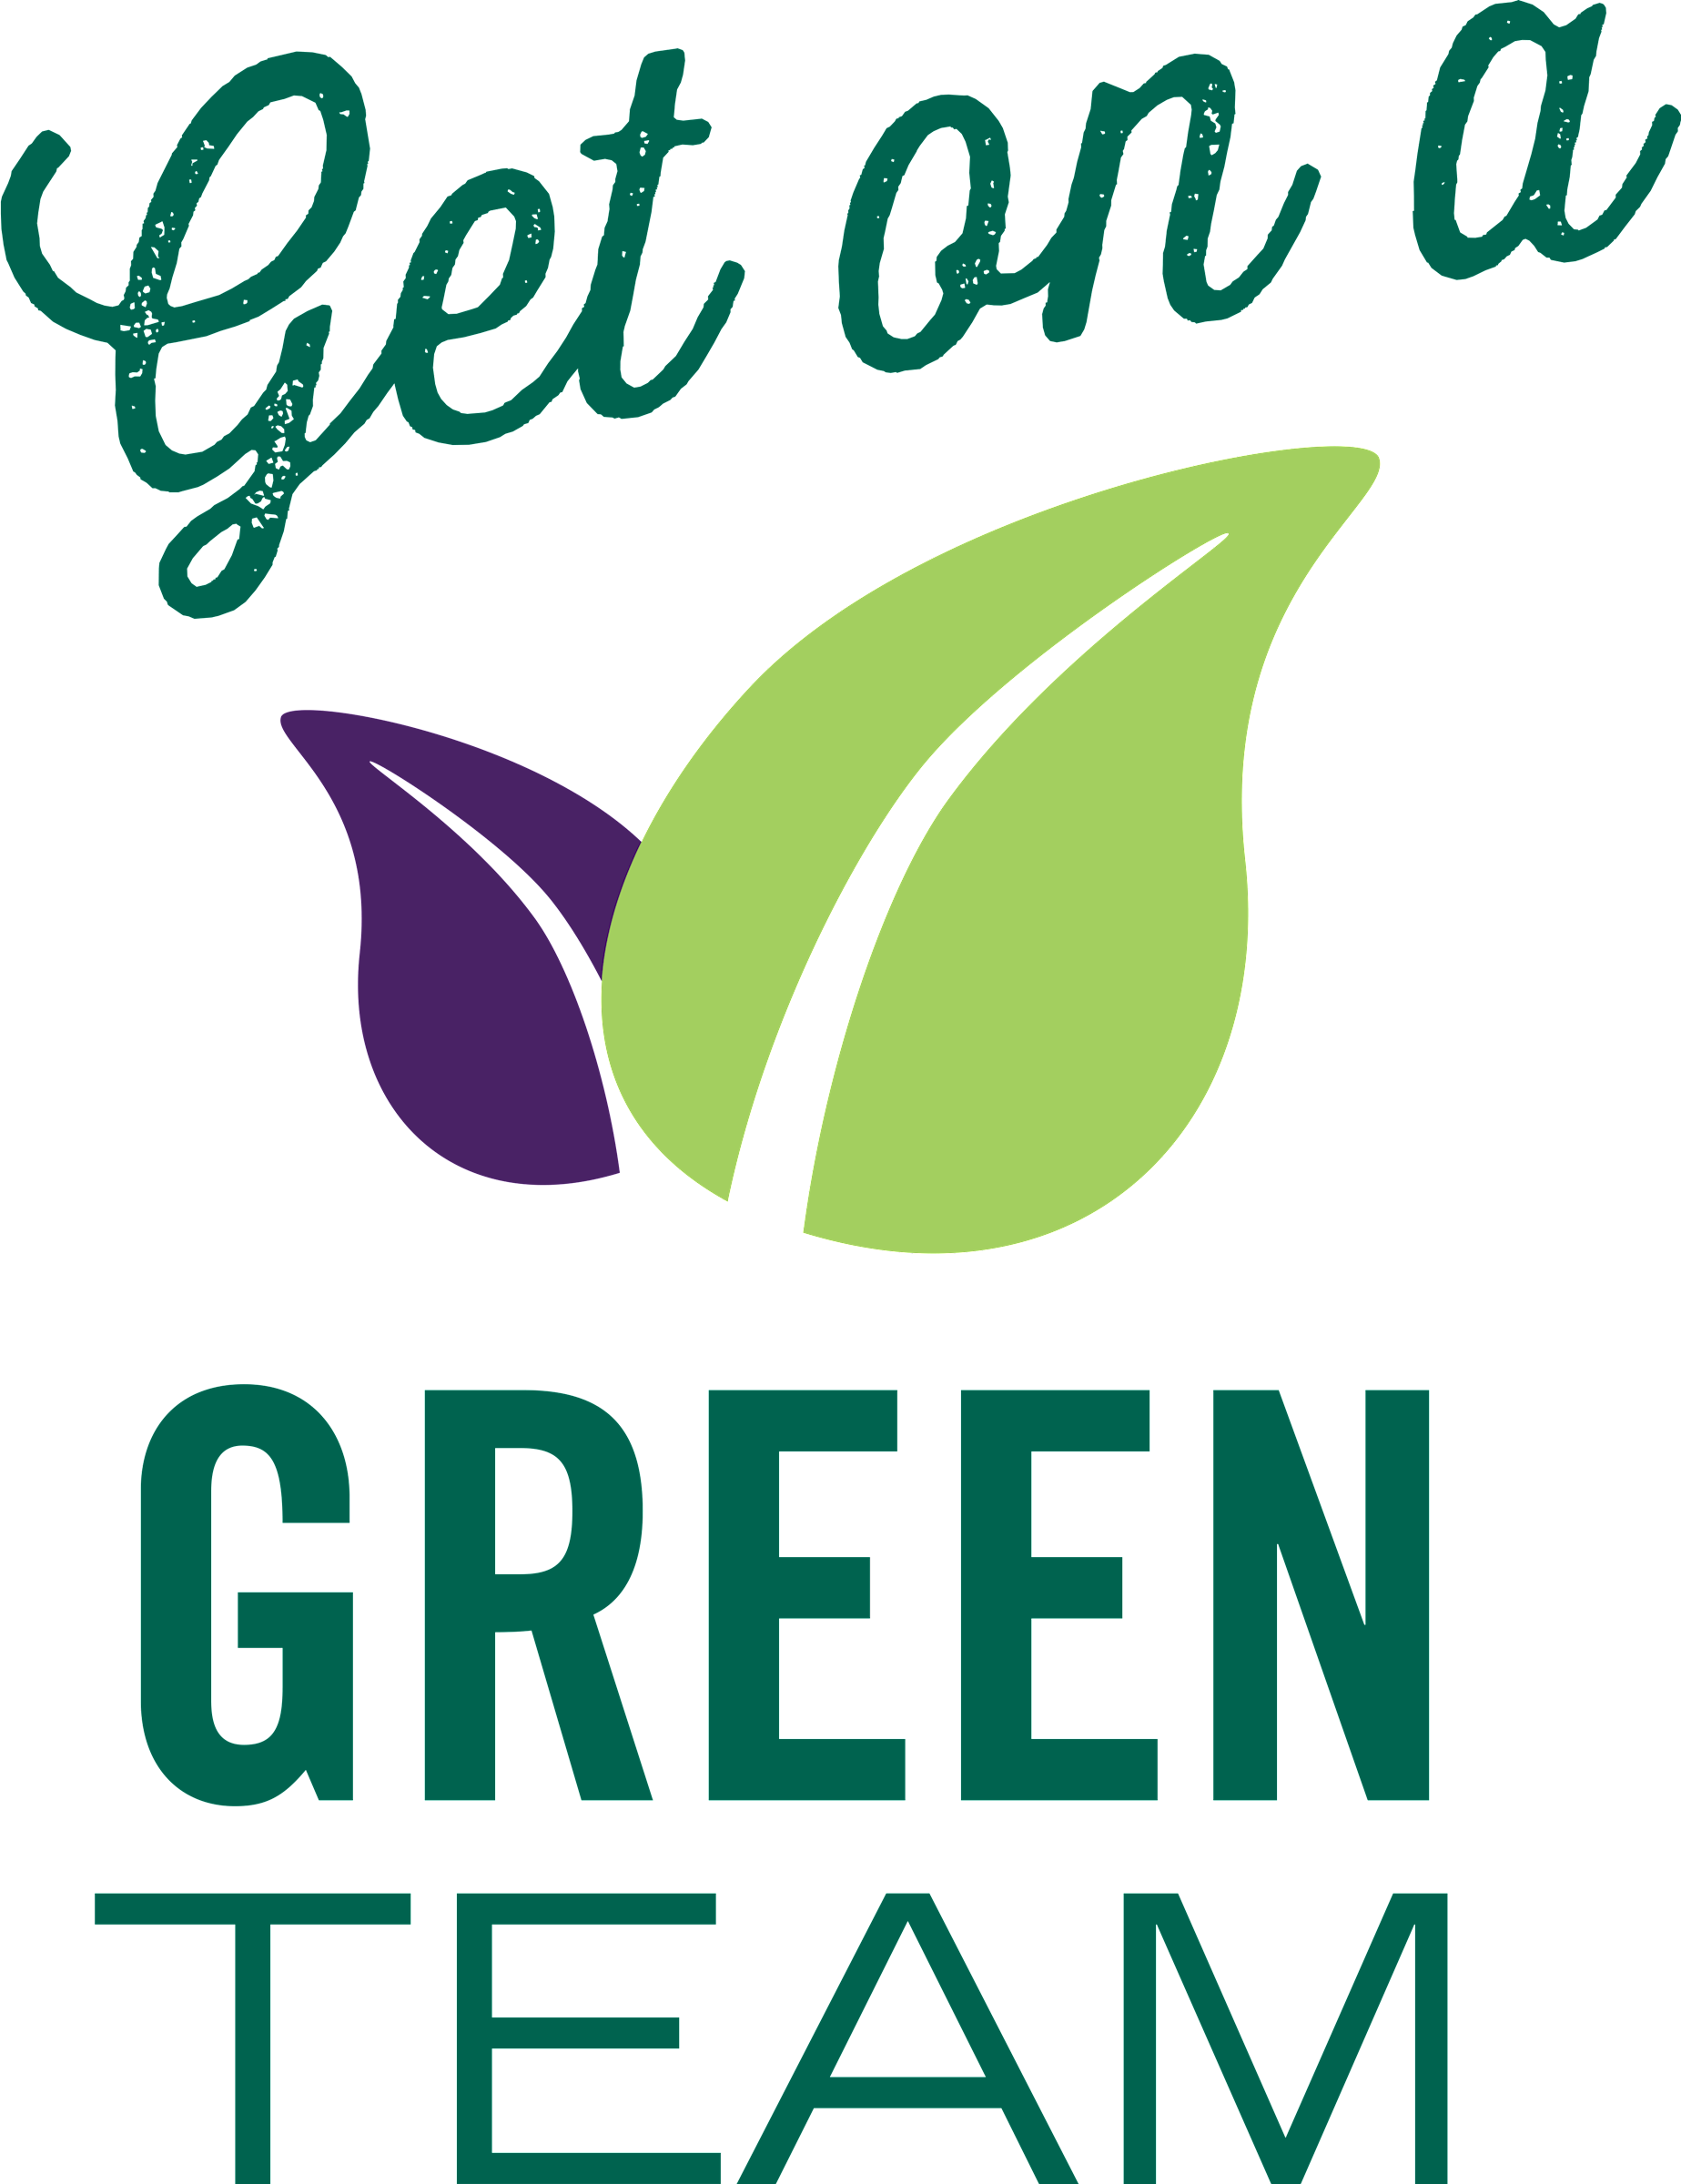 "Get on the Green Team" logo with small purple leaf half behind a large light green leaf.